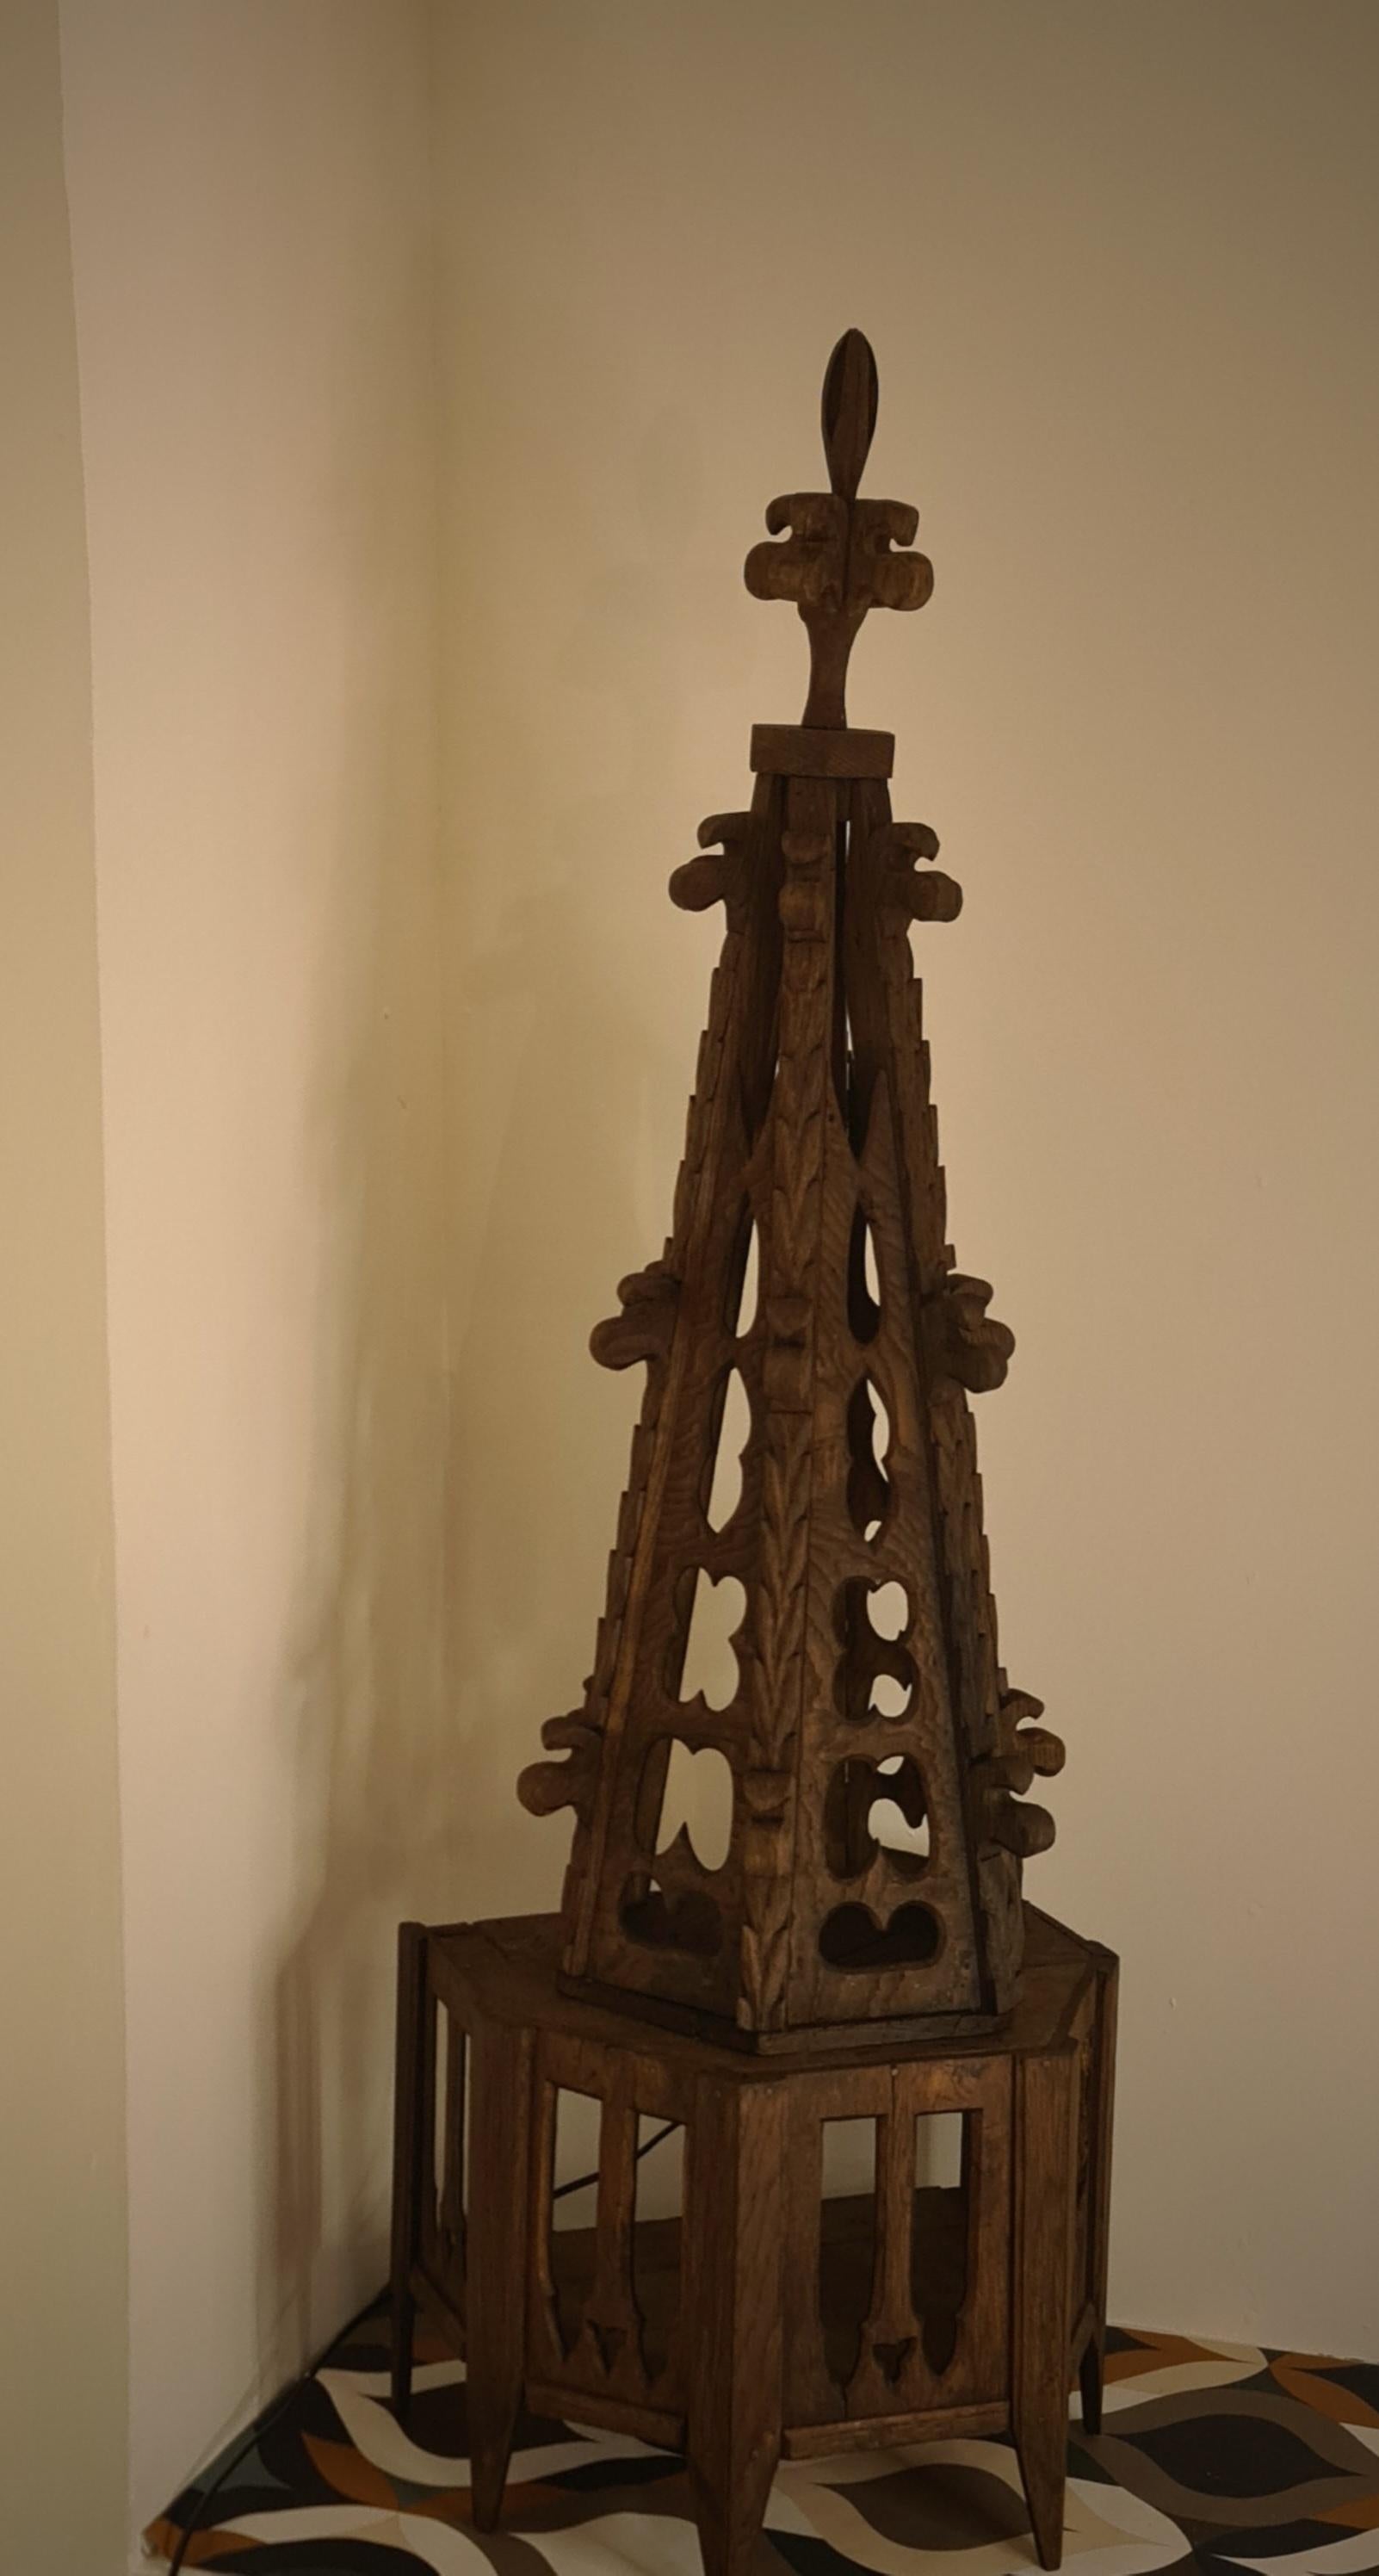 Wood Element of church decoration, Pinnacle transformed into a lamp